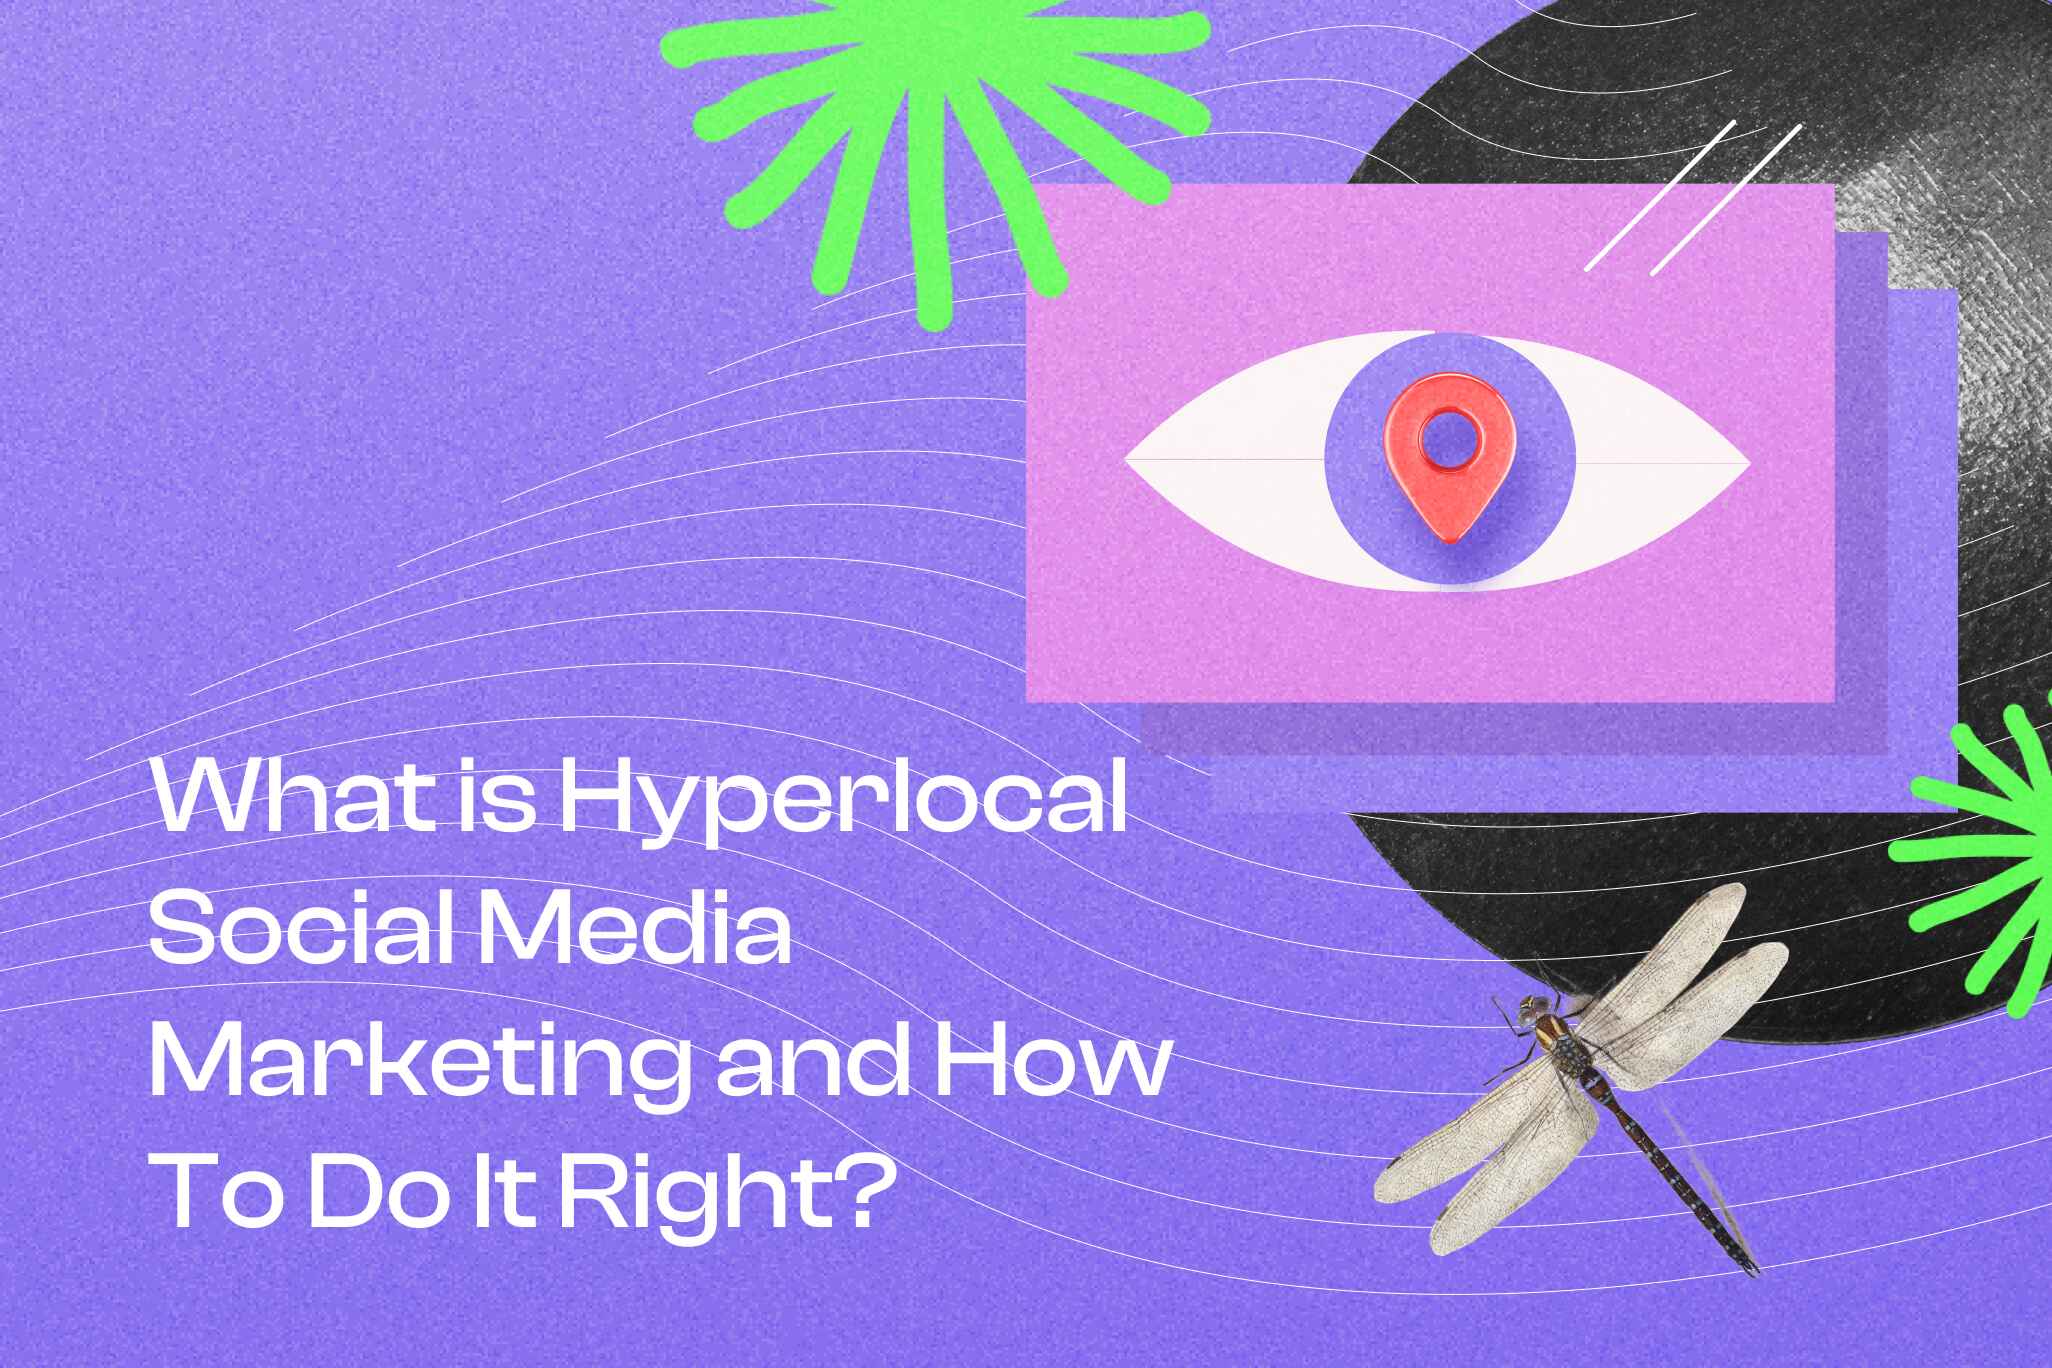 What is Hyperlocal Social Media Marketing and How To Do It Right?